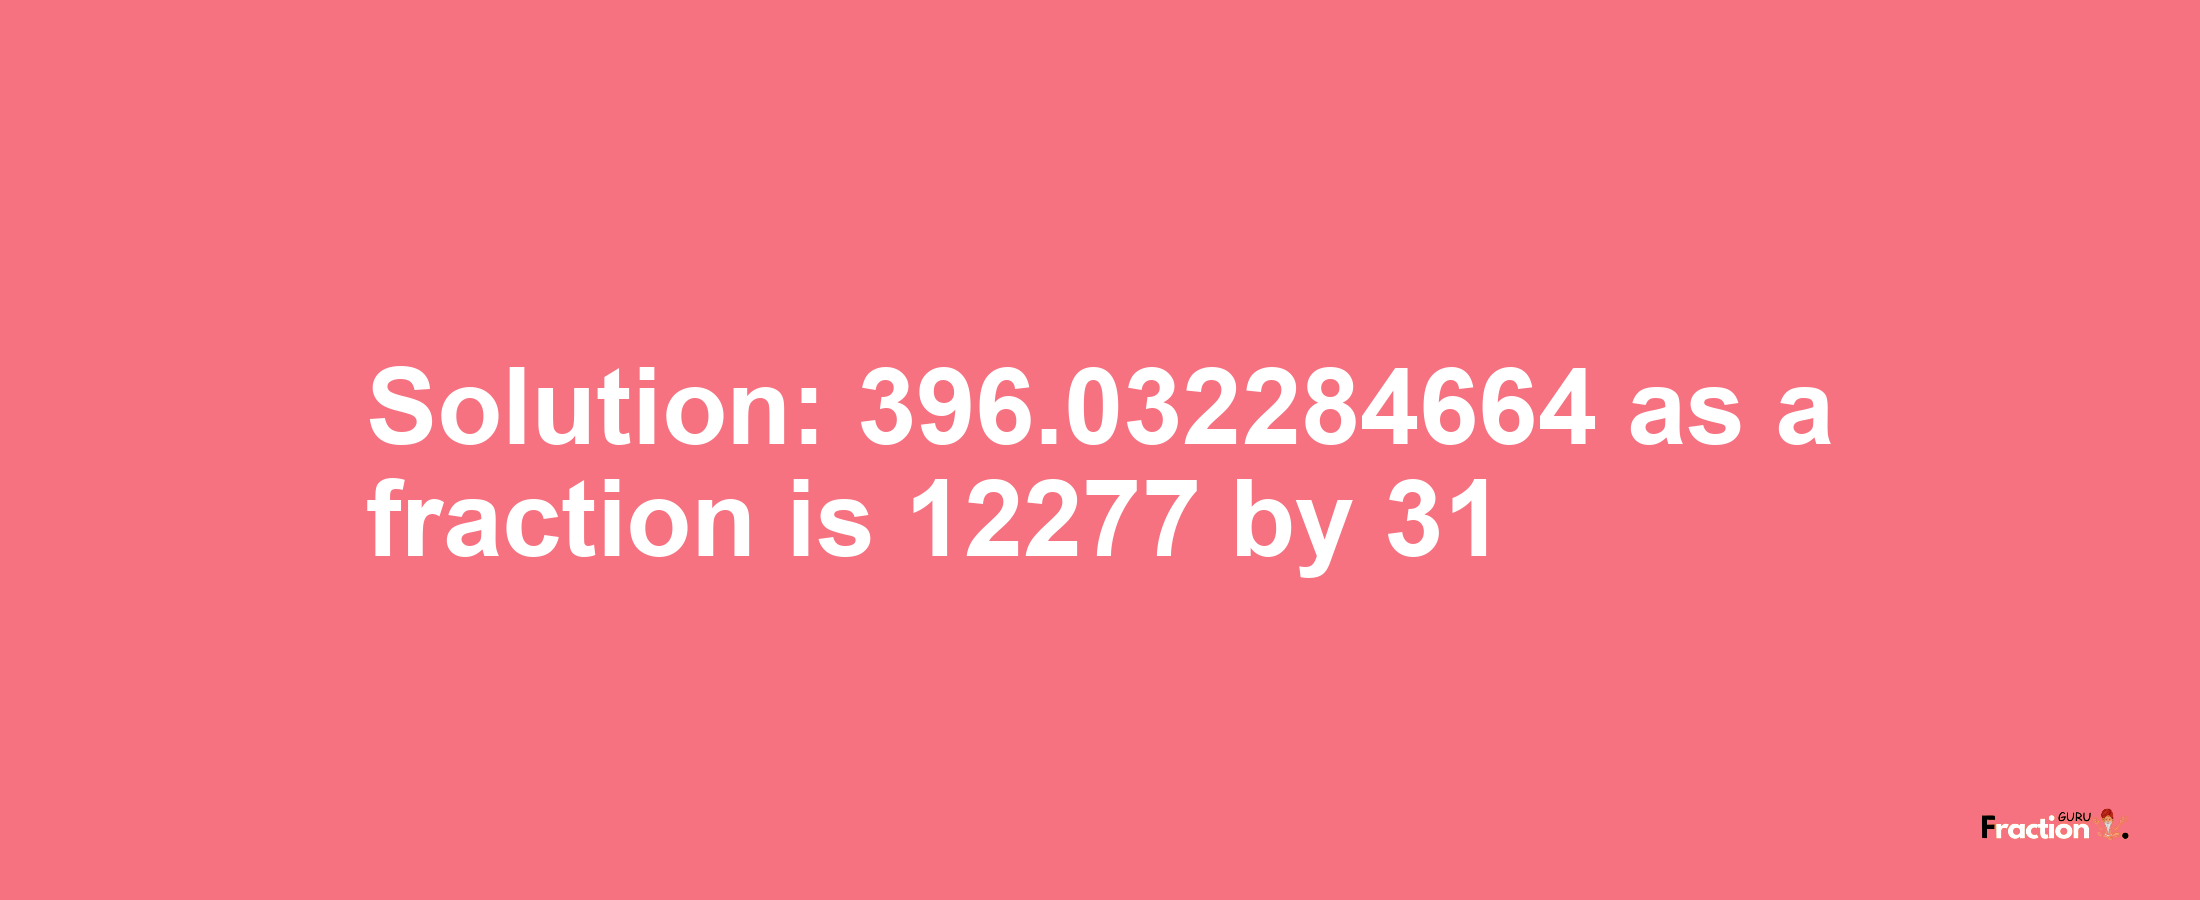 Solution:396.032284664 as a fraction is 12277/31